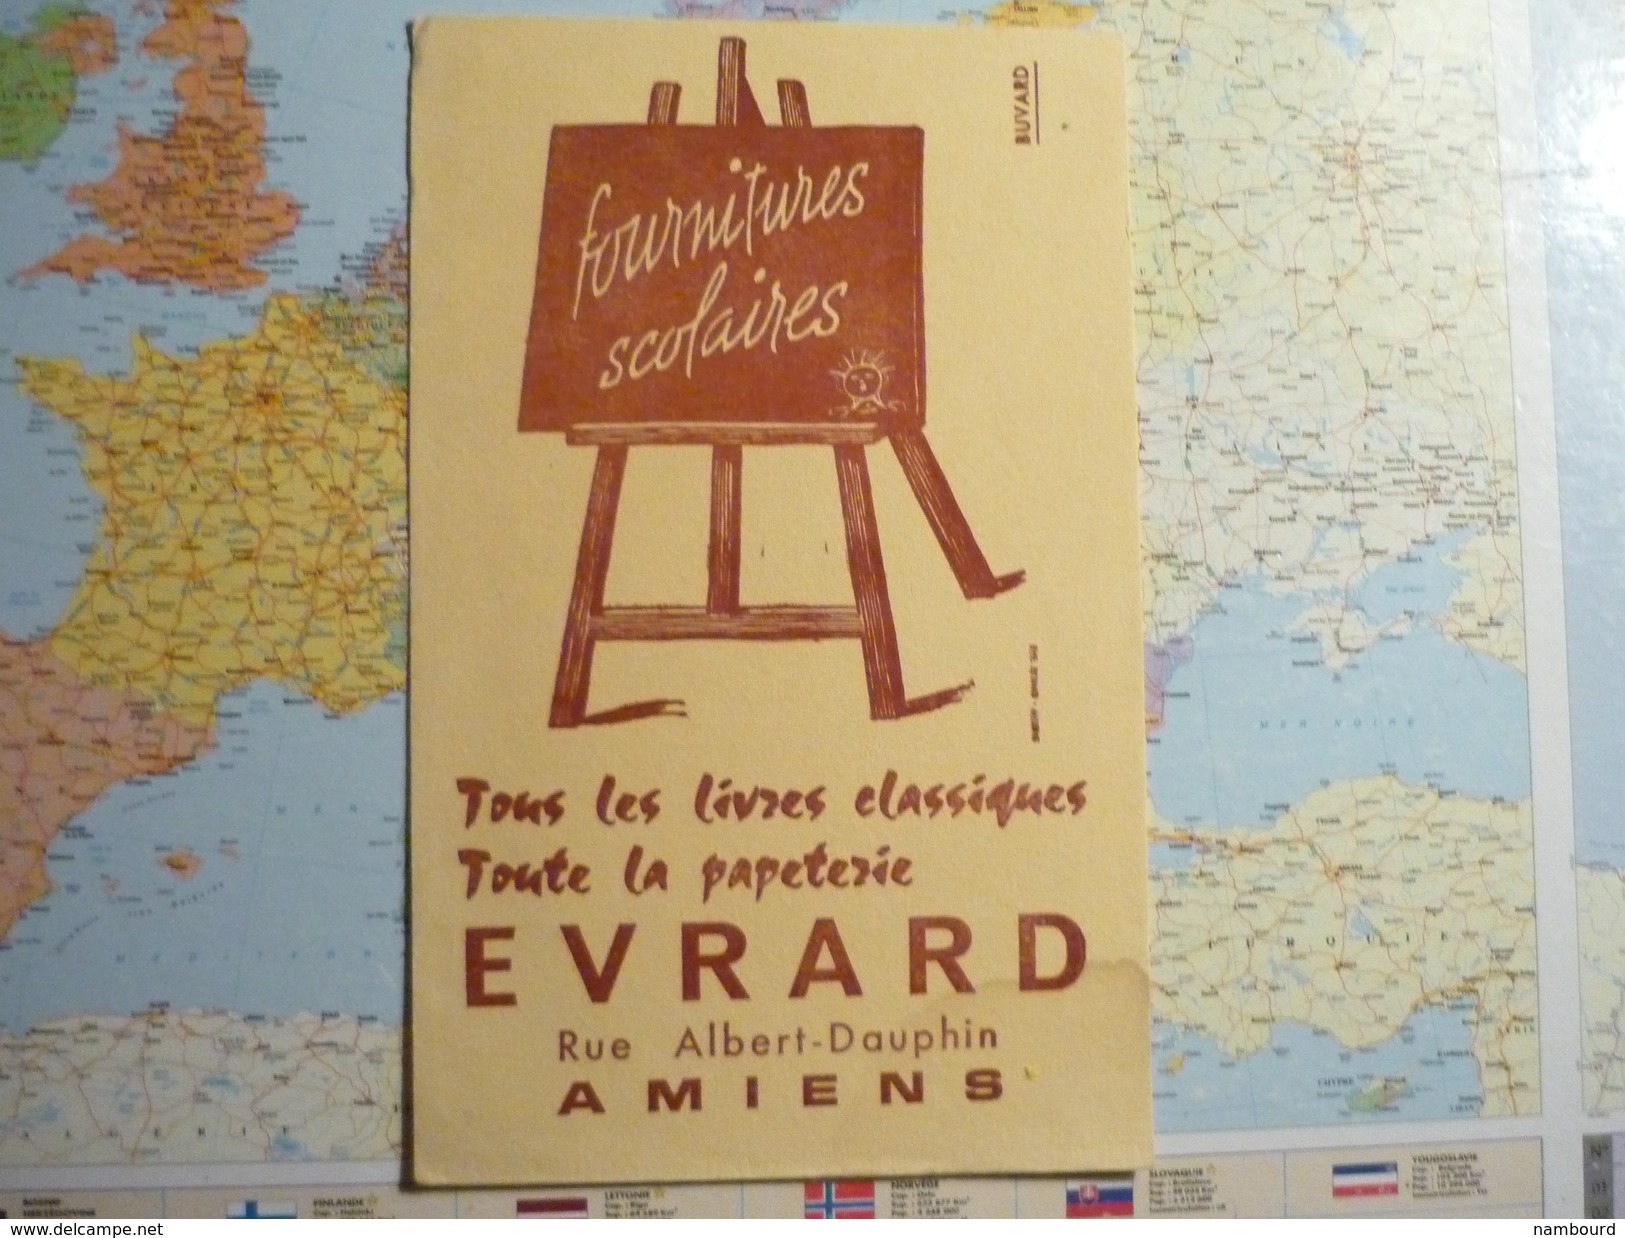 EVRARD Amiens Fournitures Scolaires 3 - Papeterie